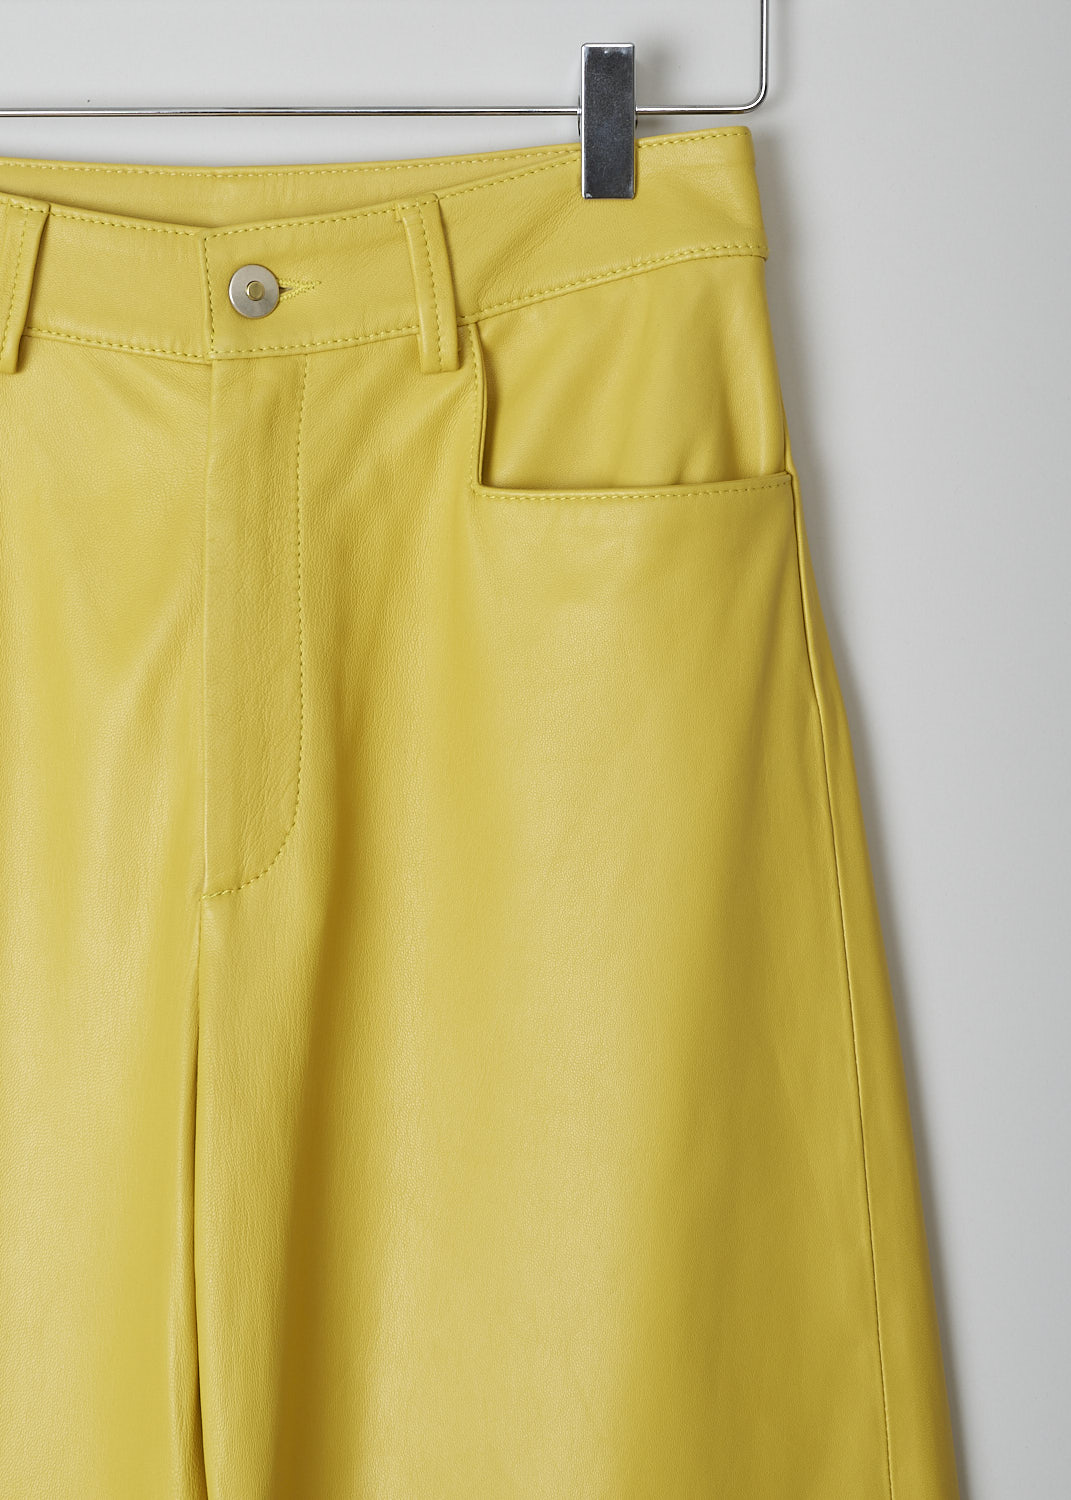 WANDLER, CHAMOMILE HOLIDAY PANTS, 22306_060301_1434_CHAMOMILE_HOLIDAY, Yellow, Detail, These yellow leather Chamomile pants have a waistband with belt loops and a button and zip closure. The pants have a high-waisted fit. The balloon legs are cropped at the ankle. These pants have slanted pockets in the front and patch pockets in the back. 

